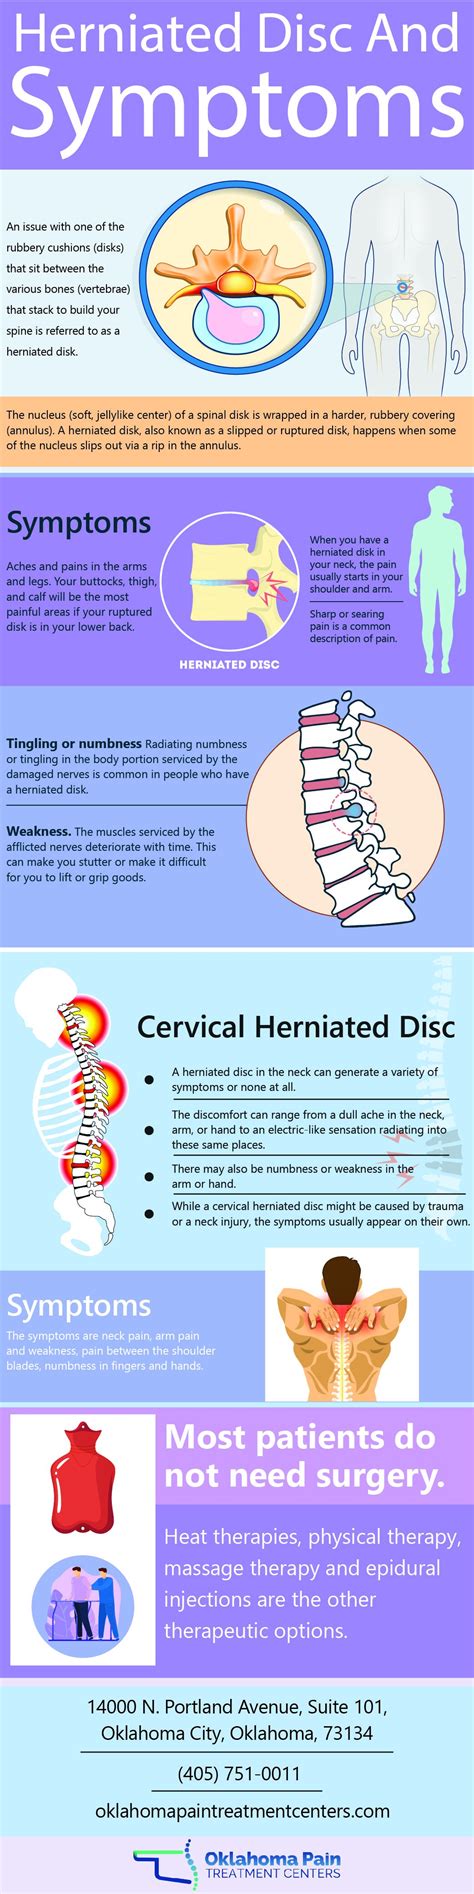 Herniated Disc And Symptoms Infographic